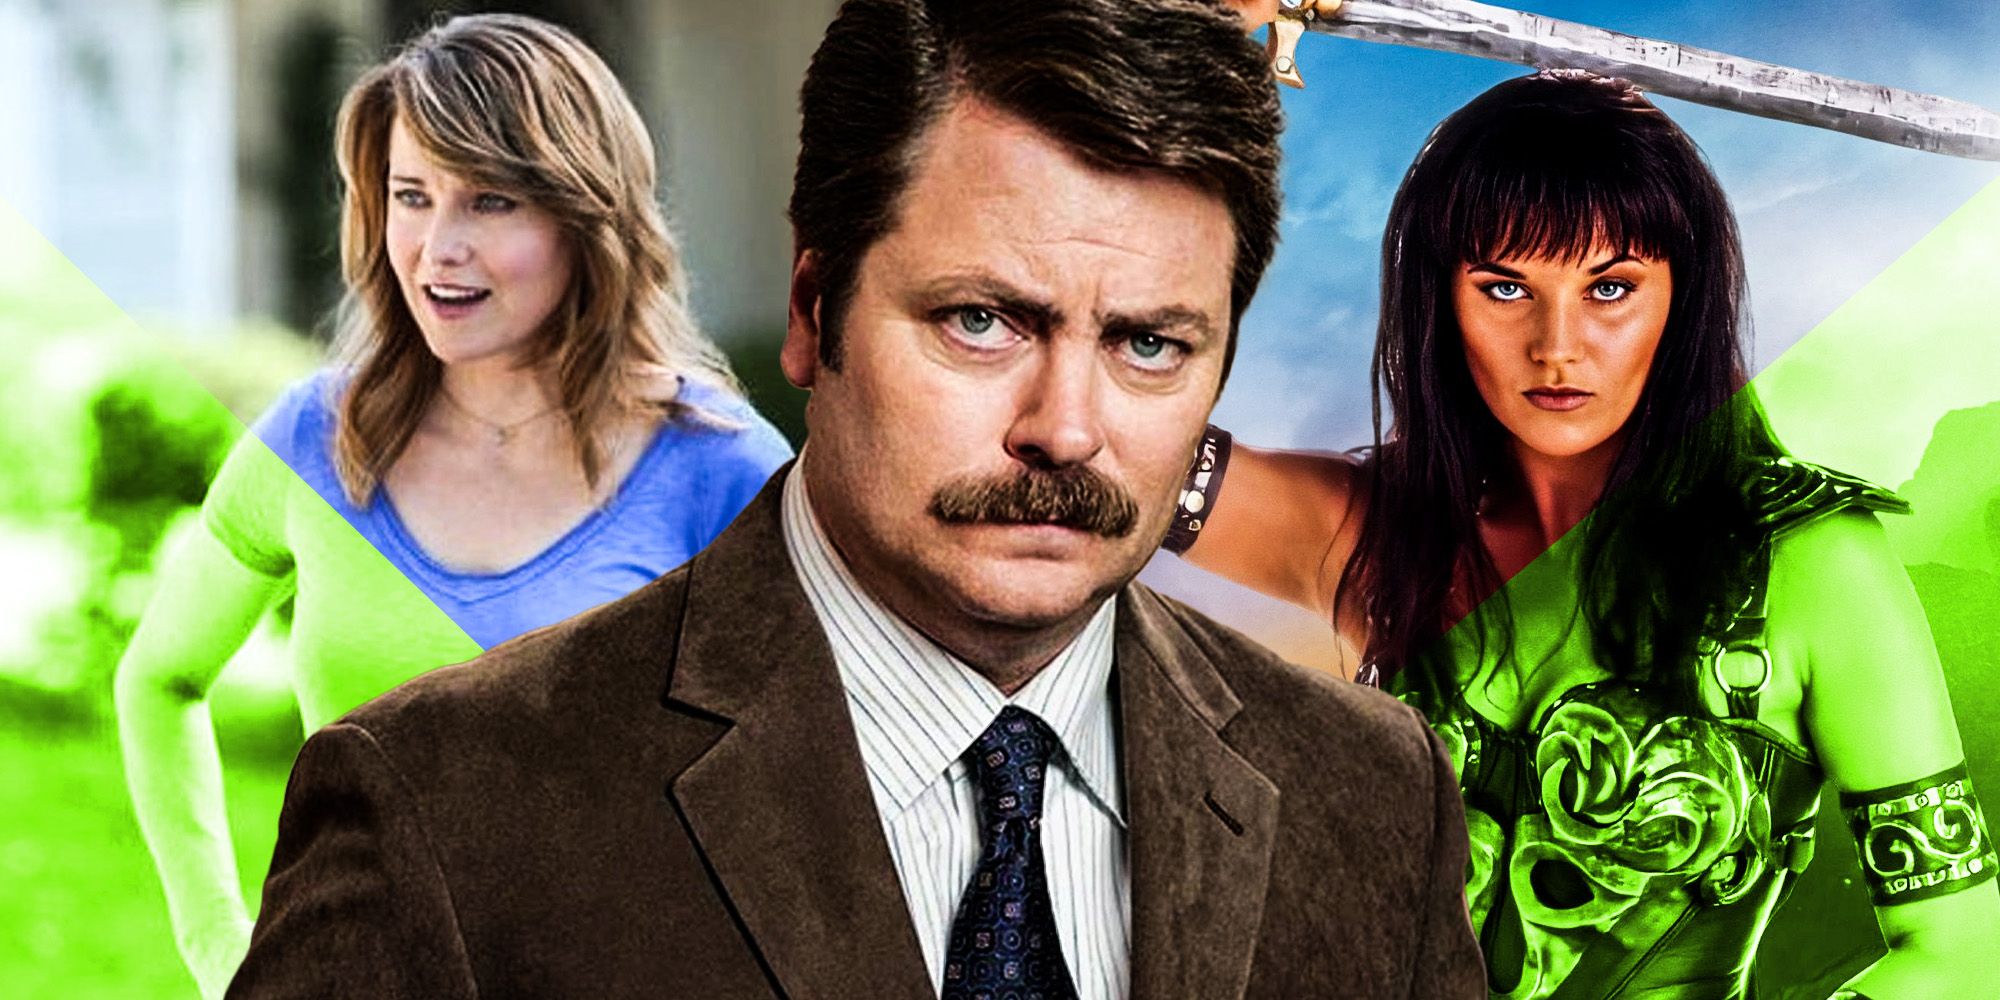 Ron Swanson Parks and Rec Xena Warrior princess payoff Lucy Lawless